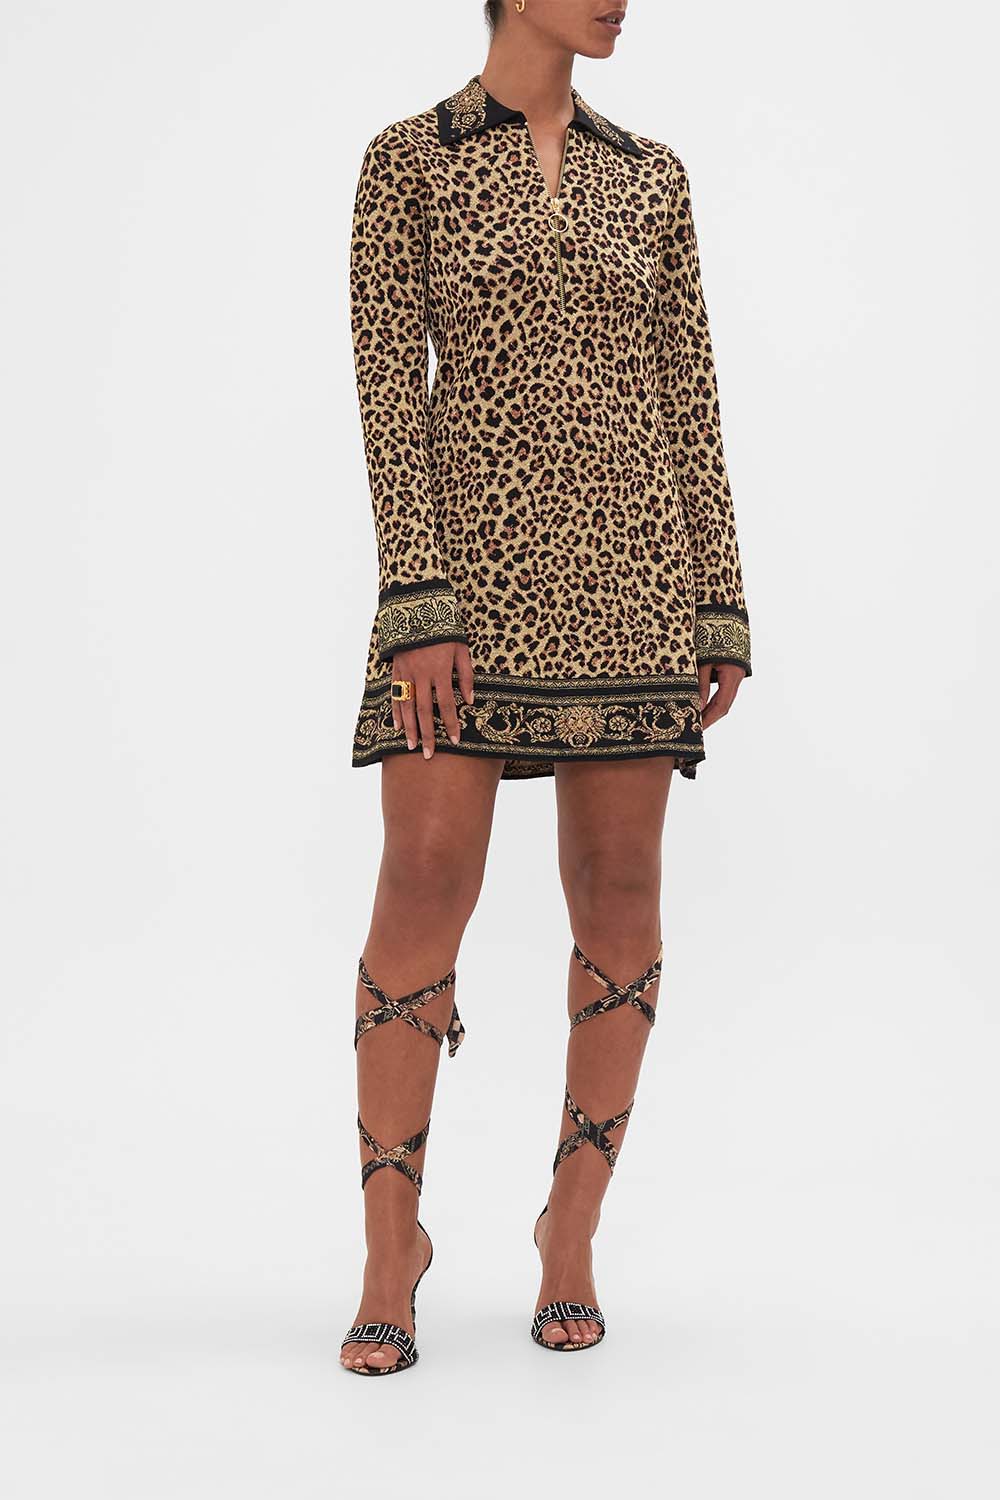 Front view of model wearing CAMILLA leopard print mini knit dress in Standing Ovation print